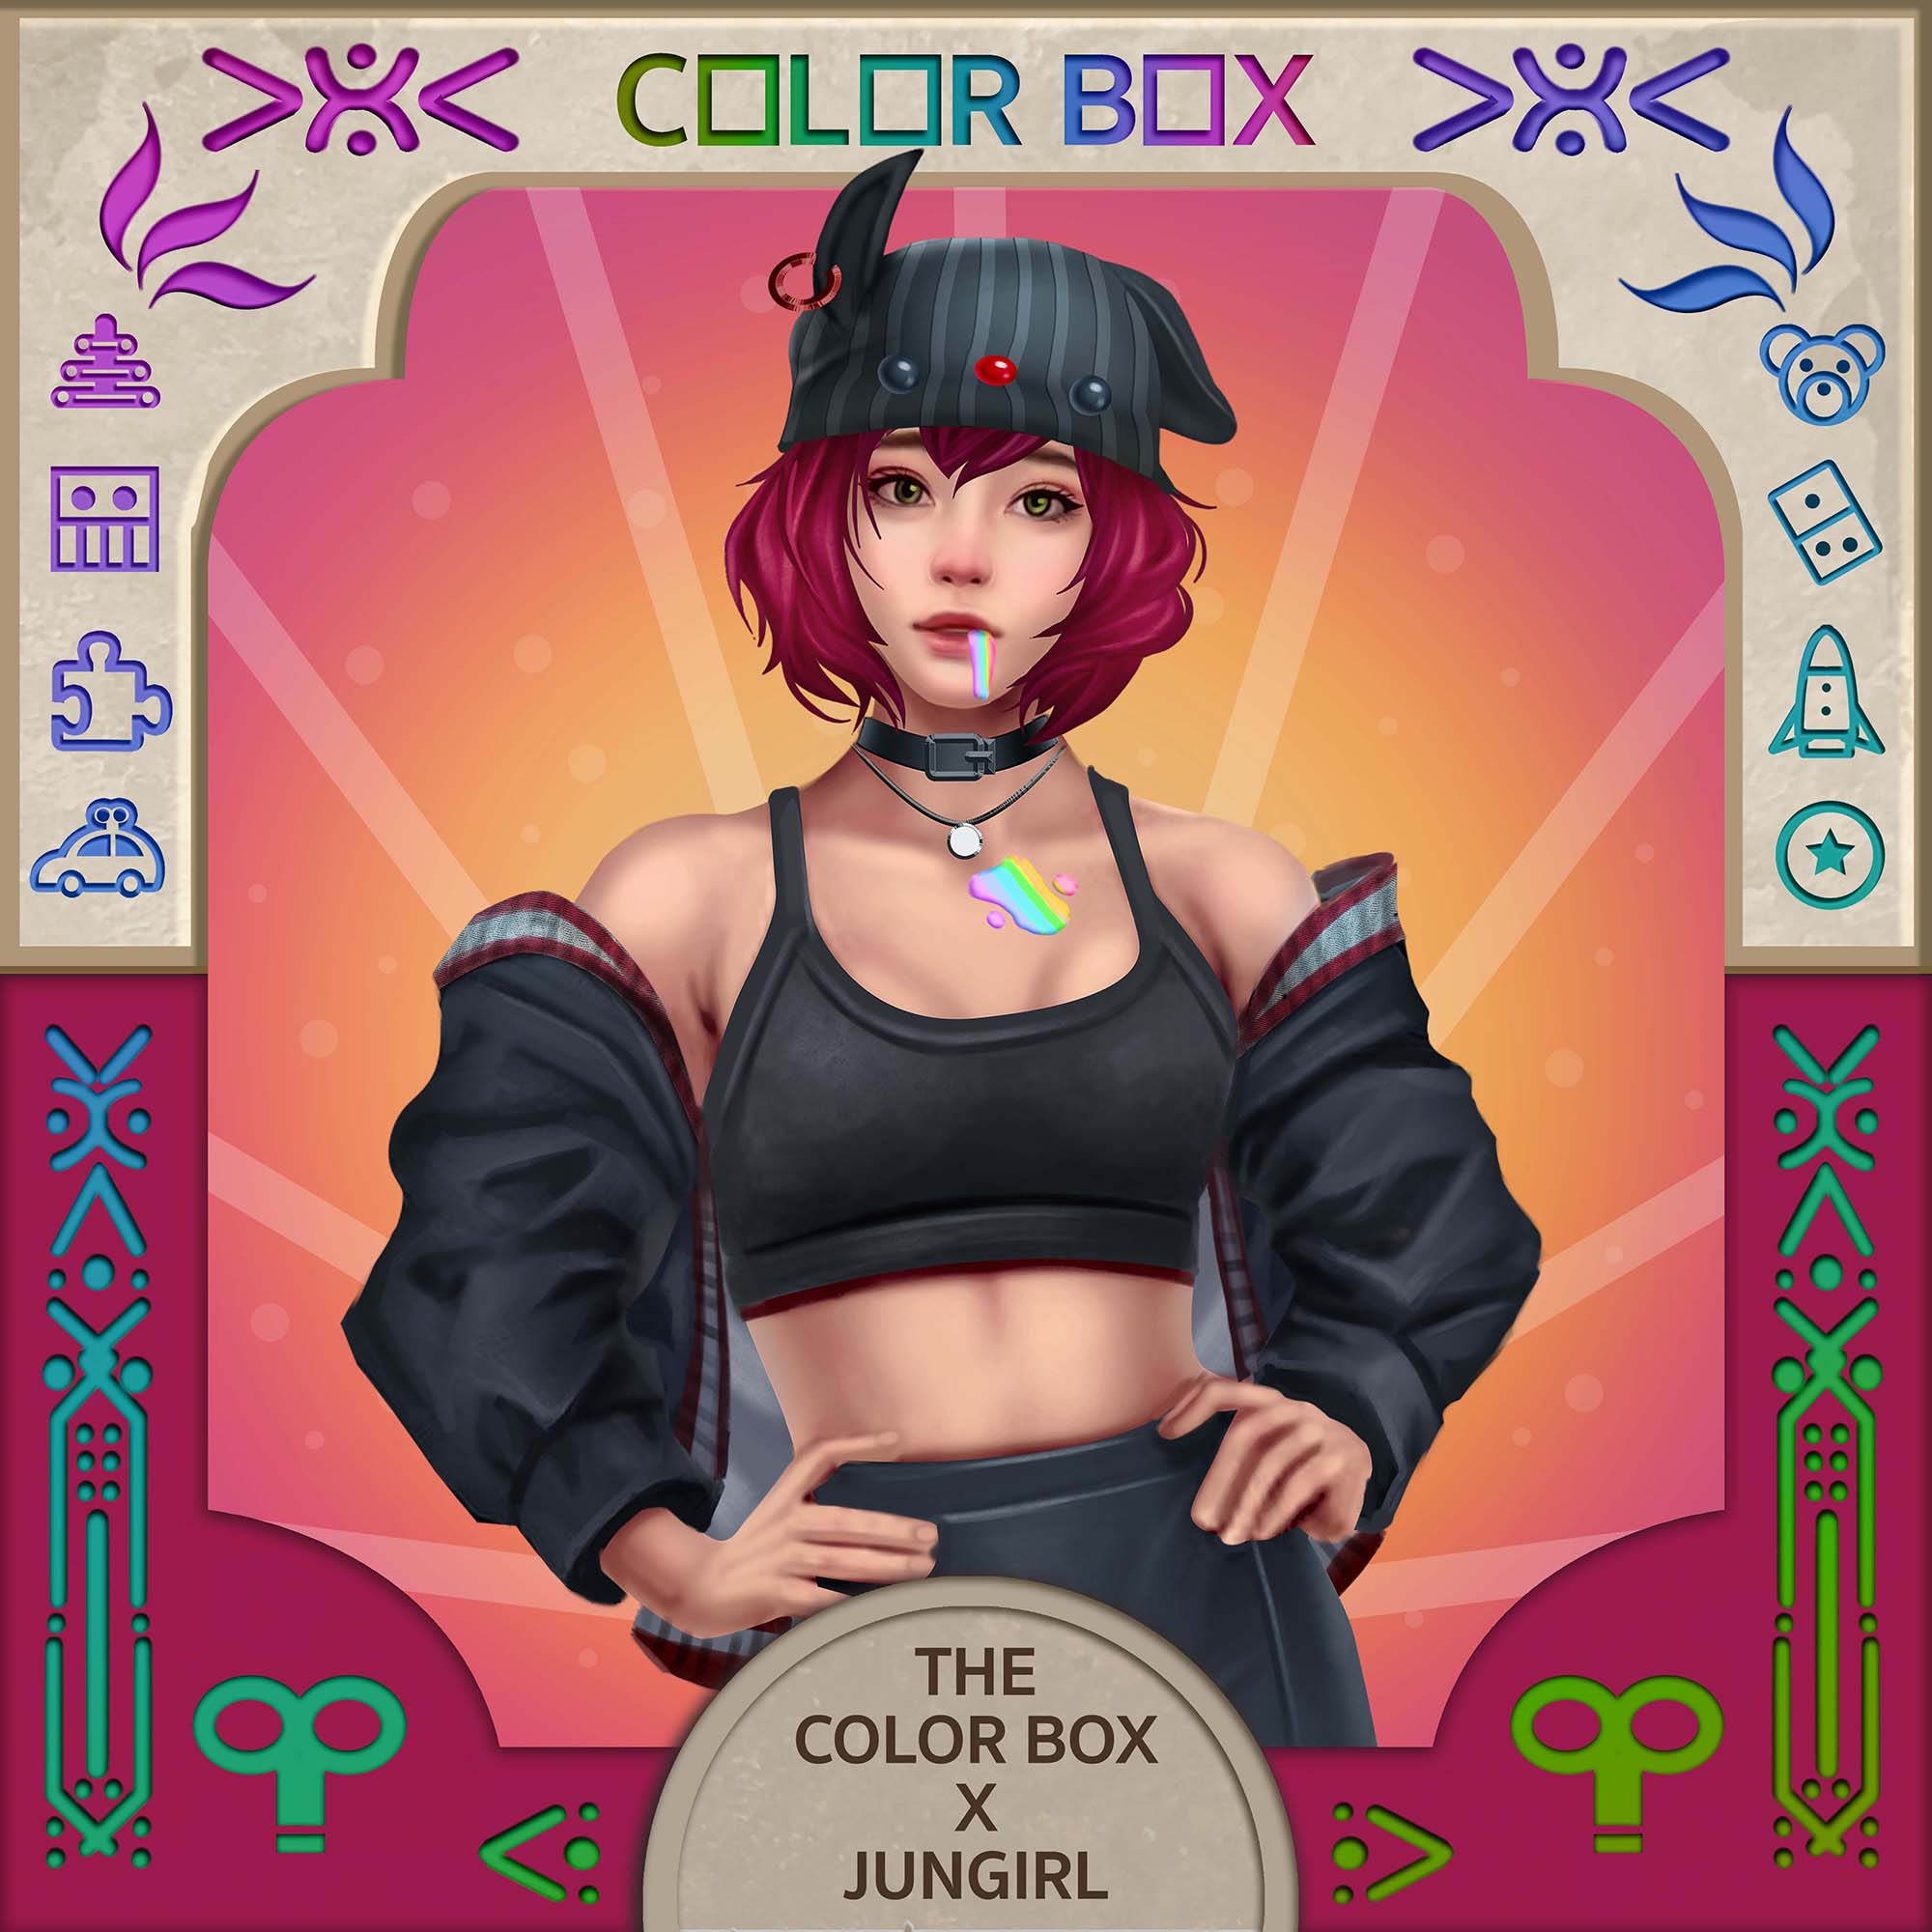 The Color Box x Jungirls